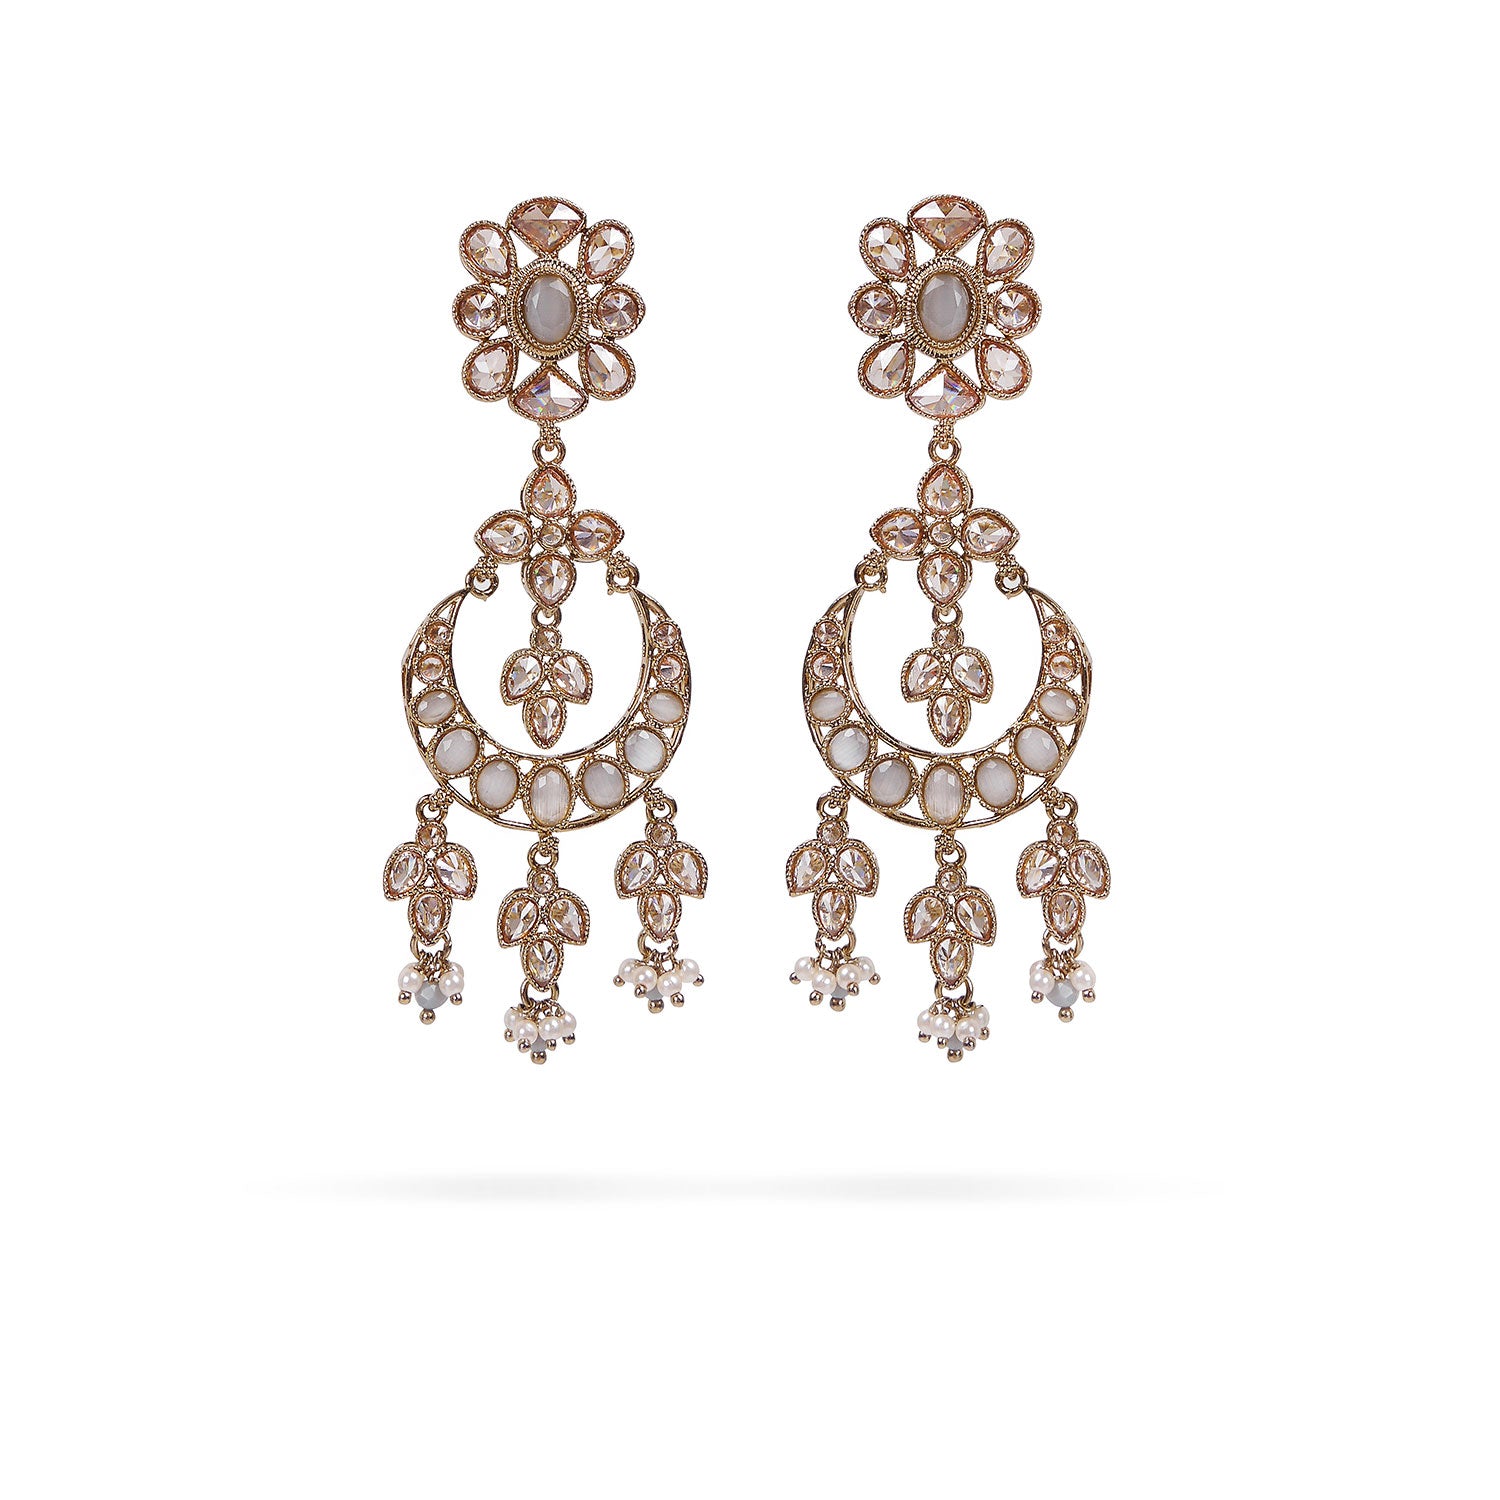 Mariana Long Crystal Earrings in Grey and Light Topaz